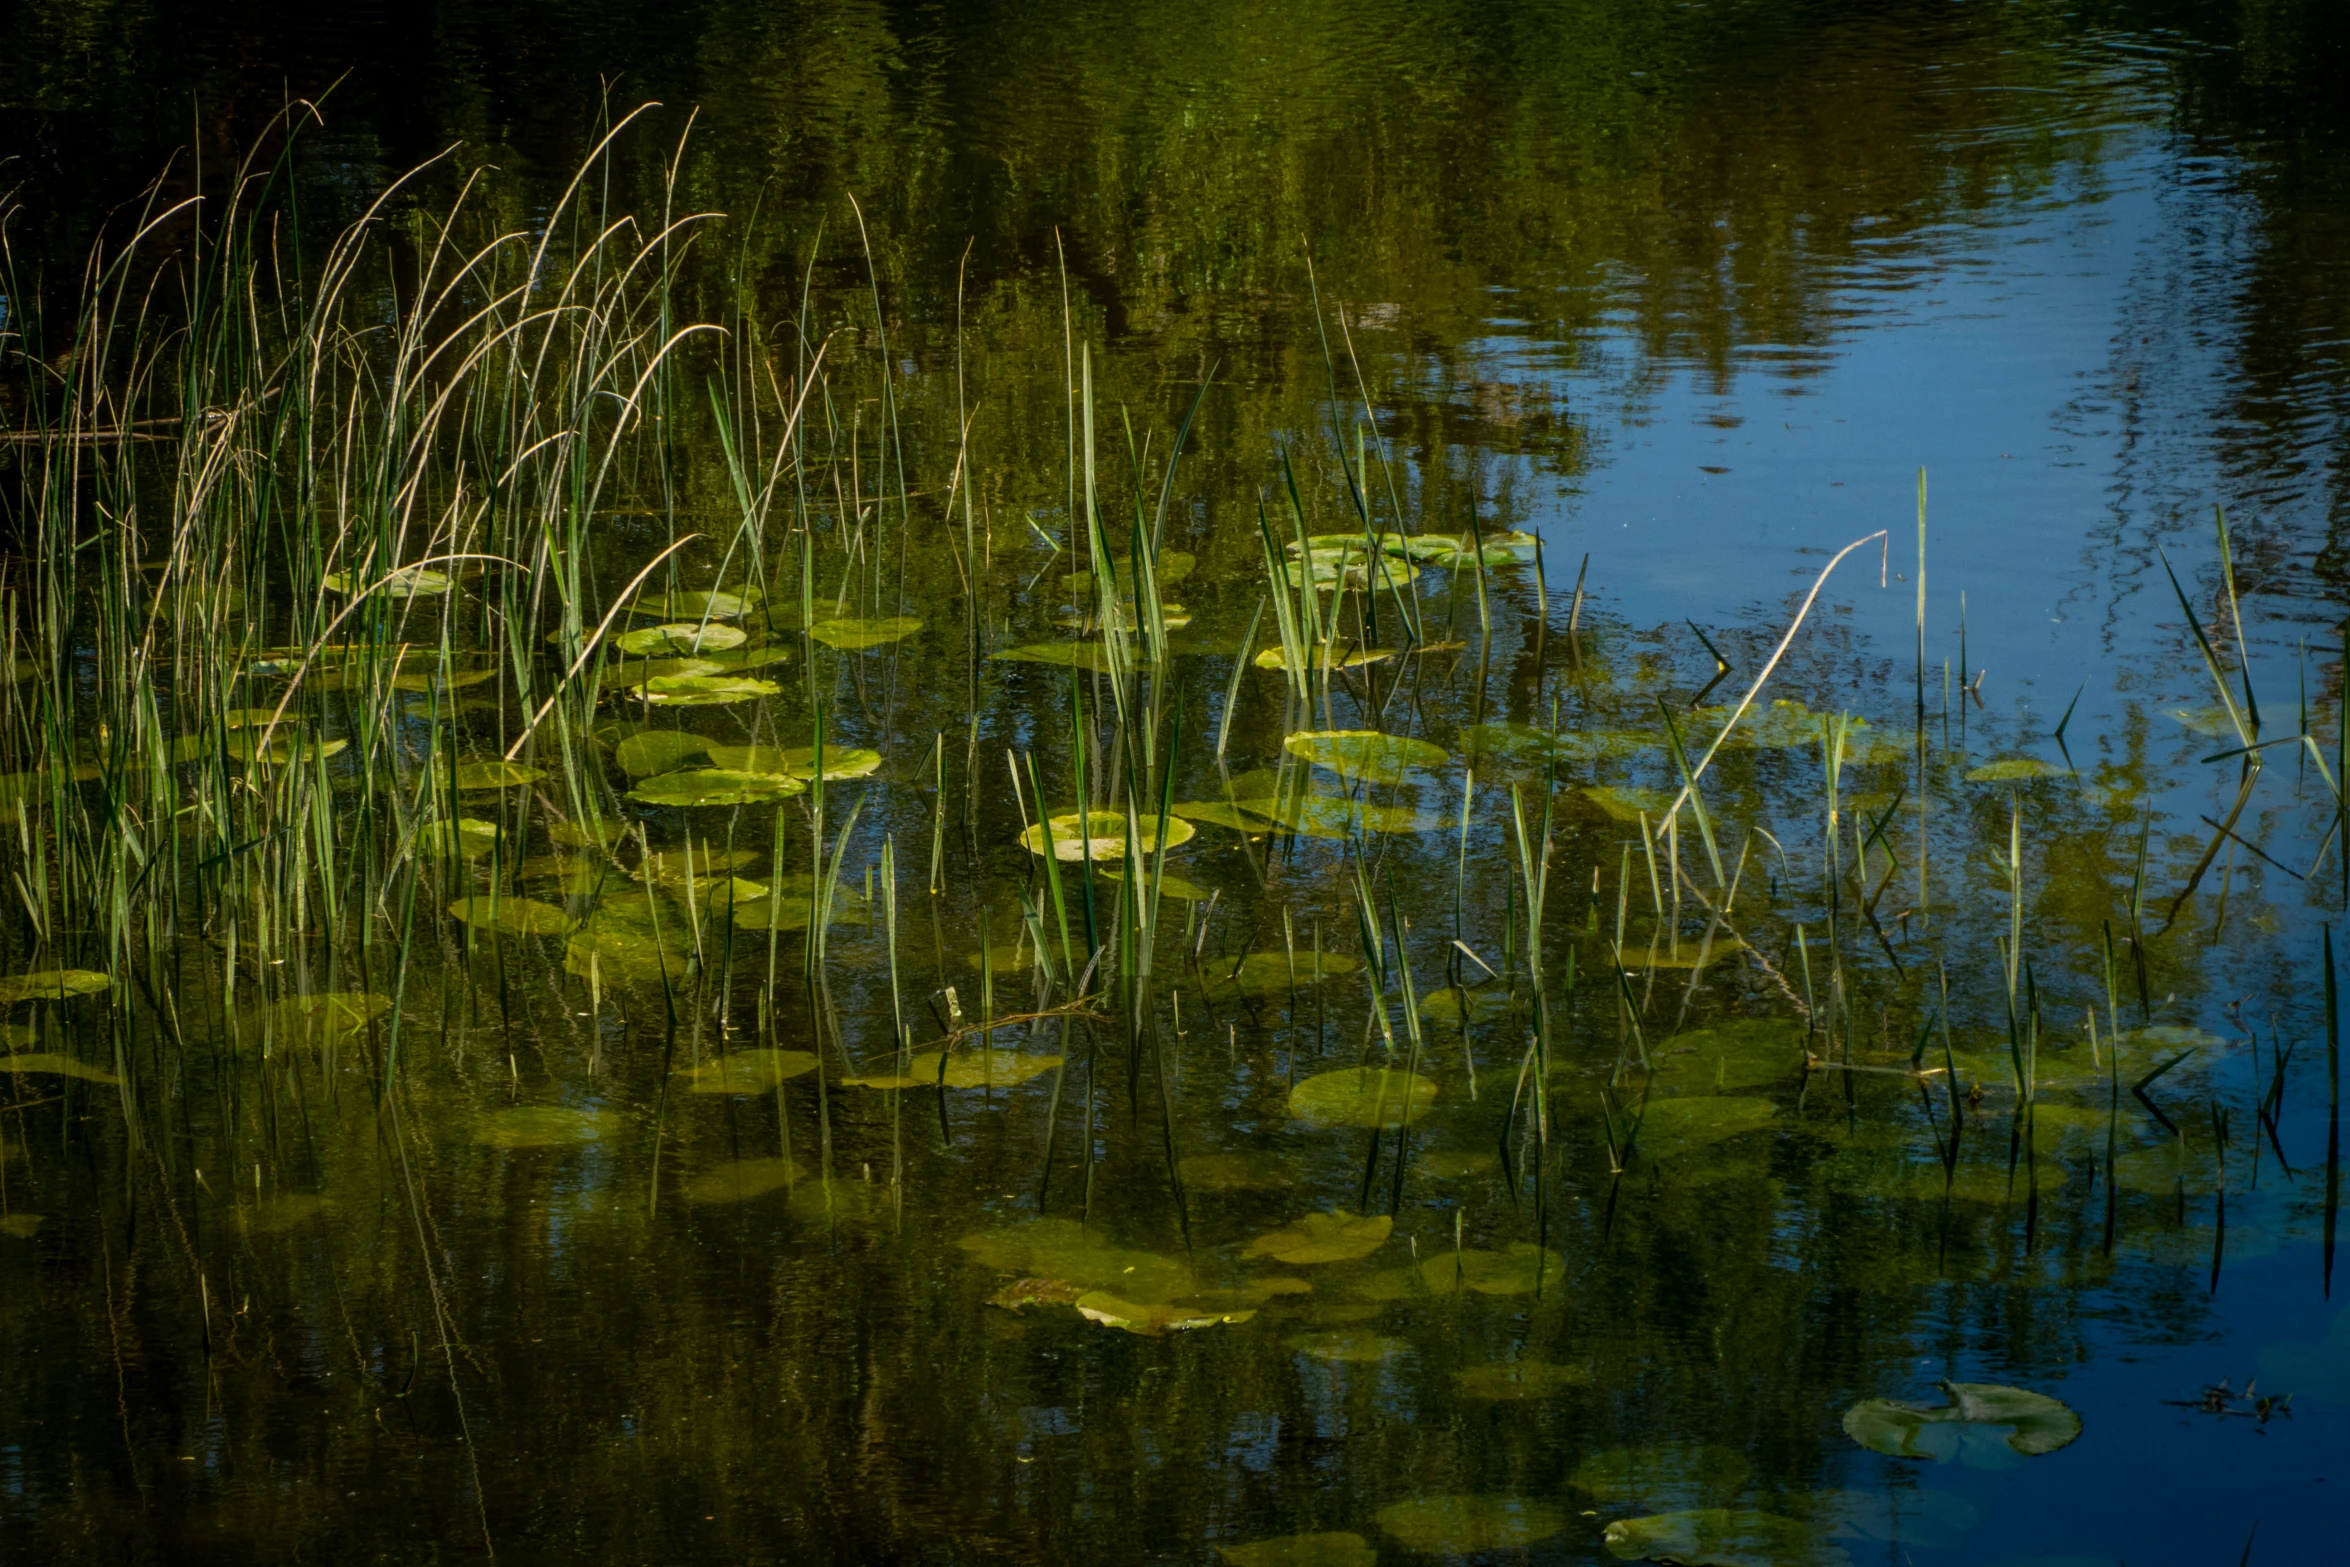 green grass and lily pads floating on a pond